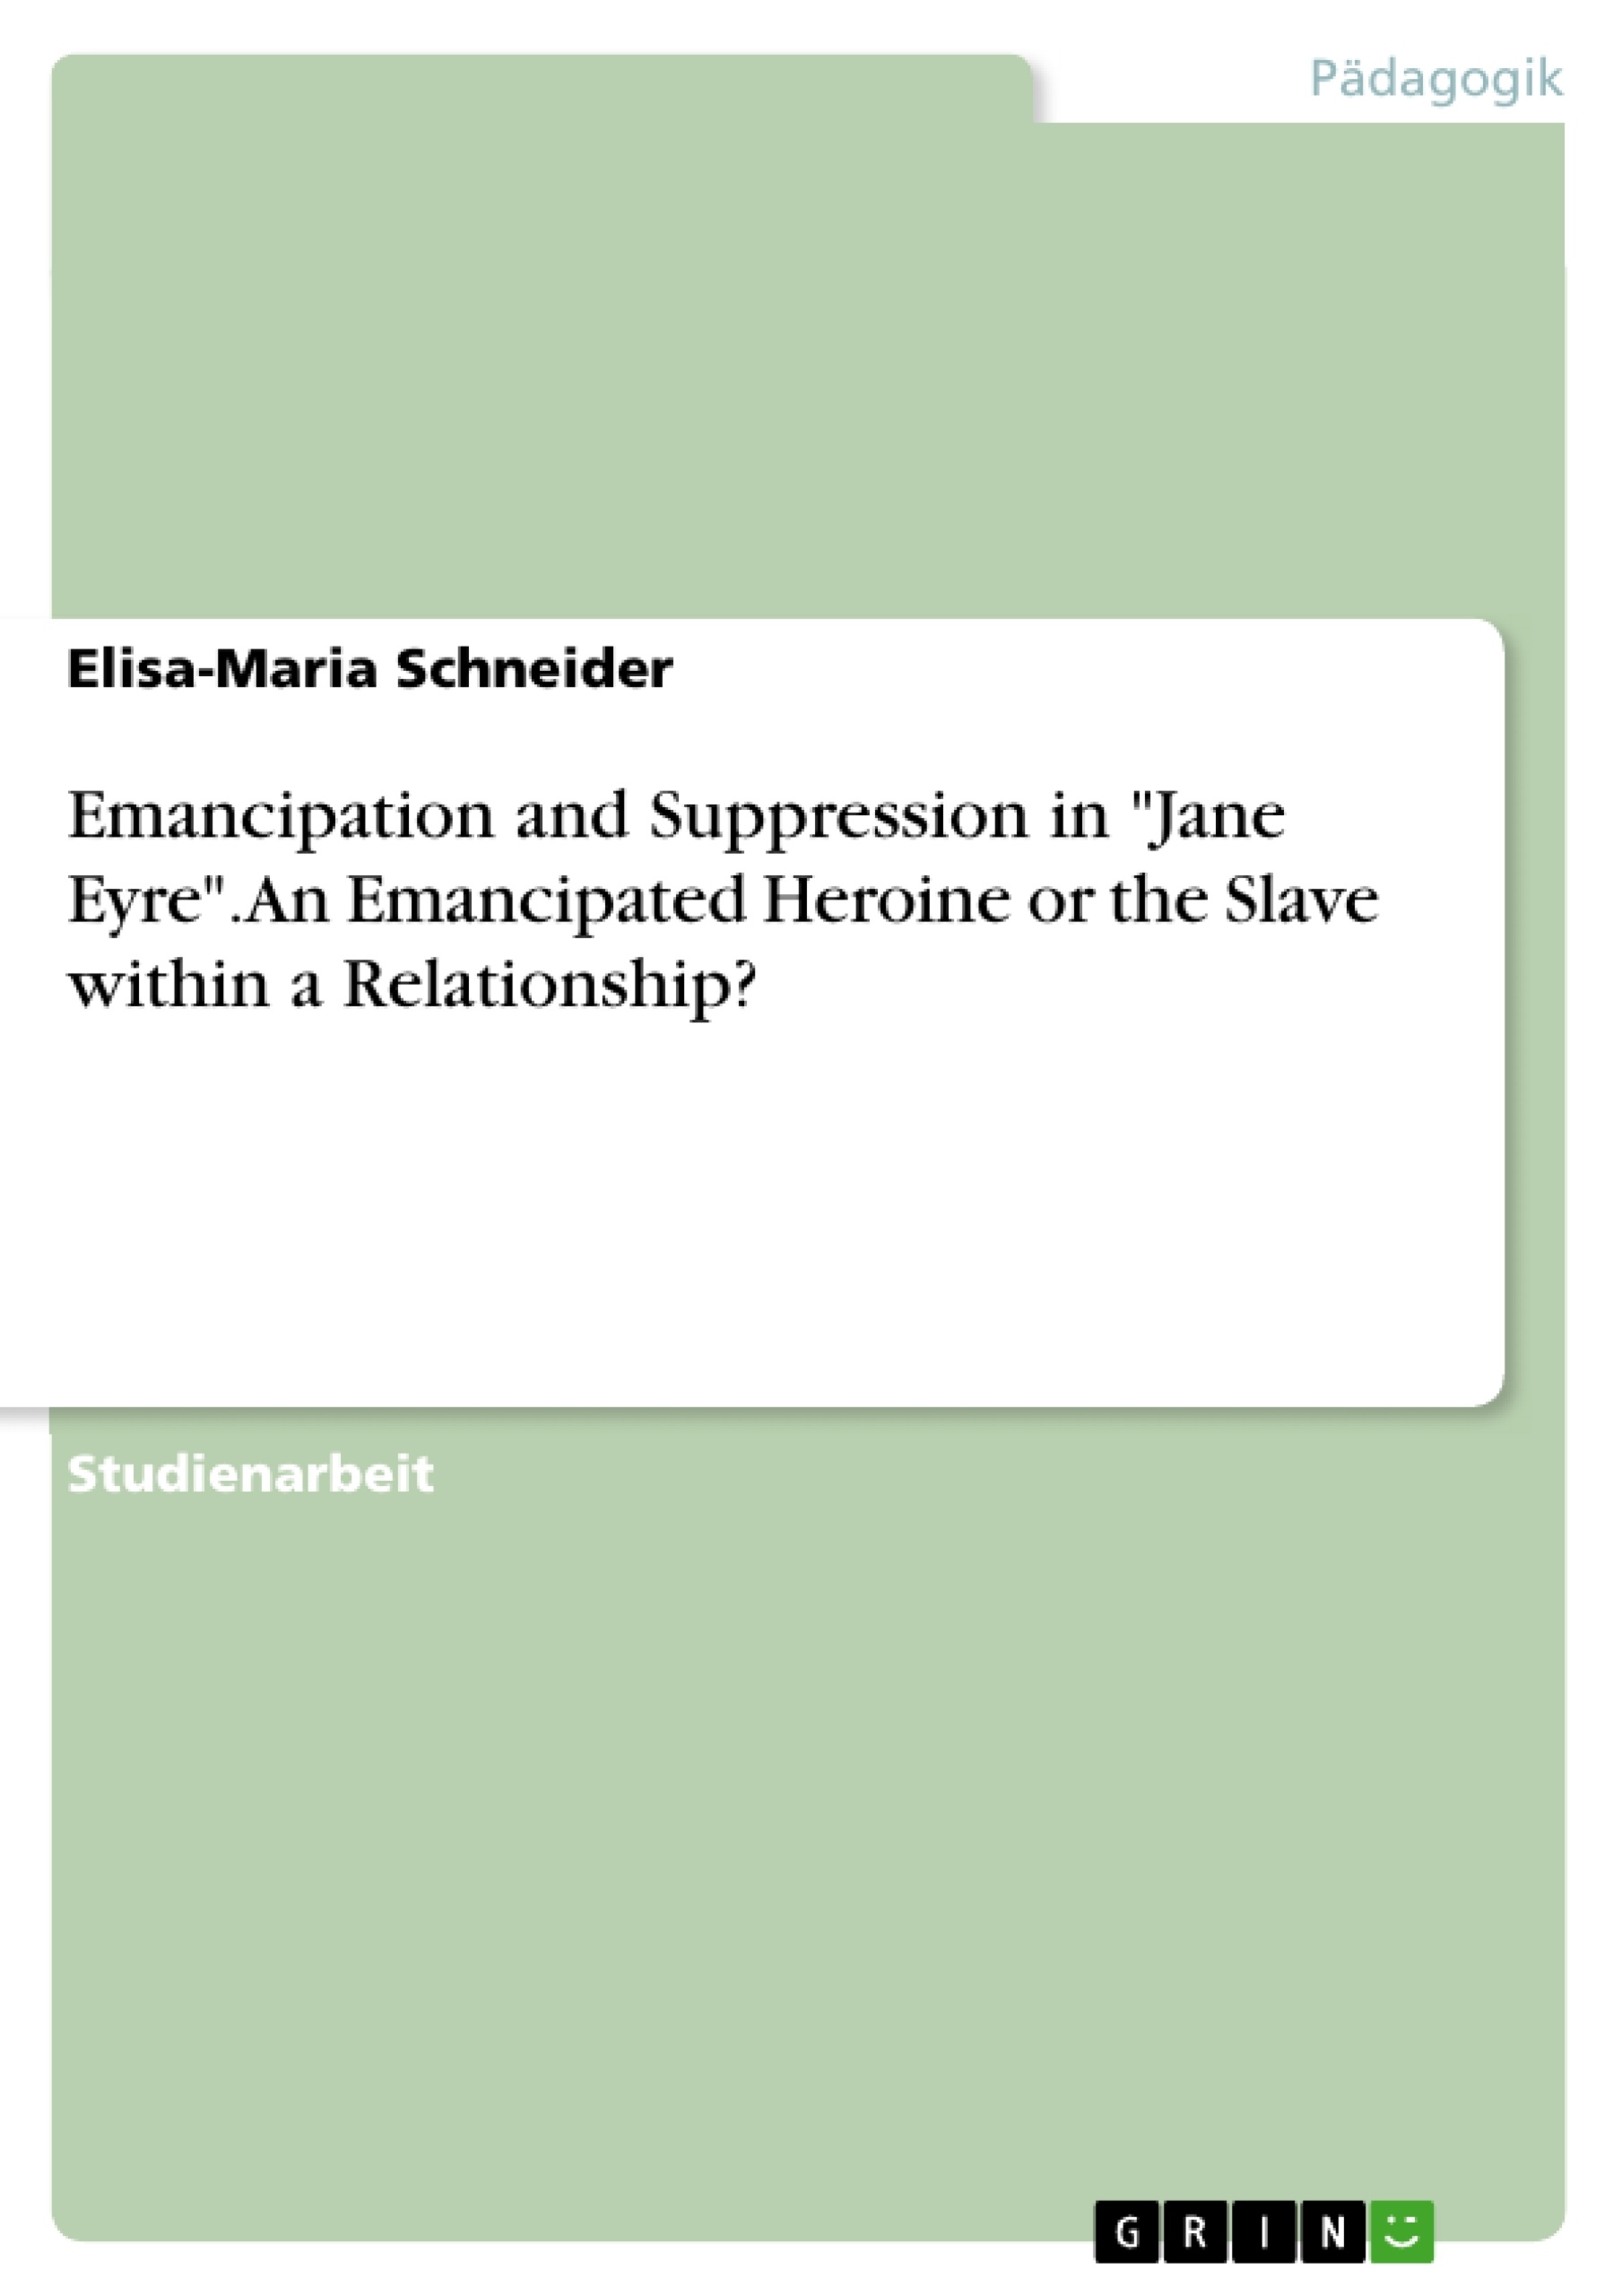 Titel: Emancipation and Suppression in "Jane Eyre". An Emancipated Heroine or the Slave within a Relationship?